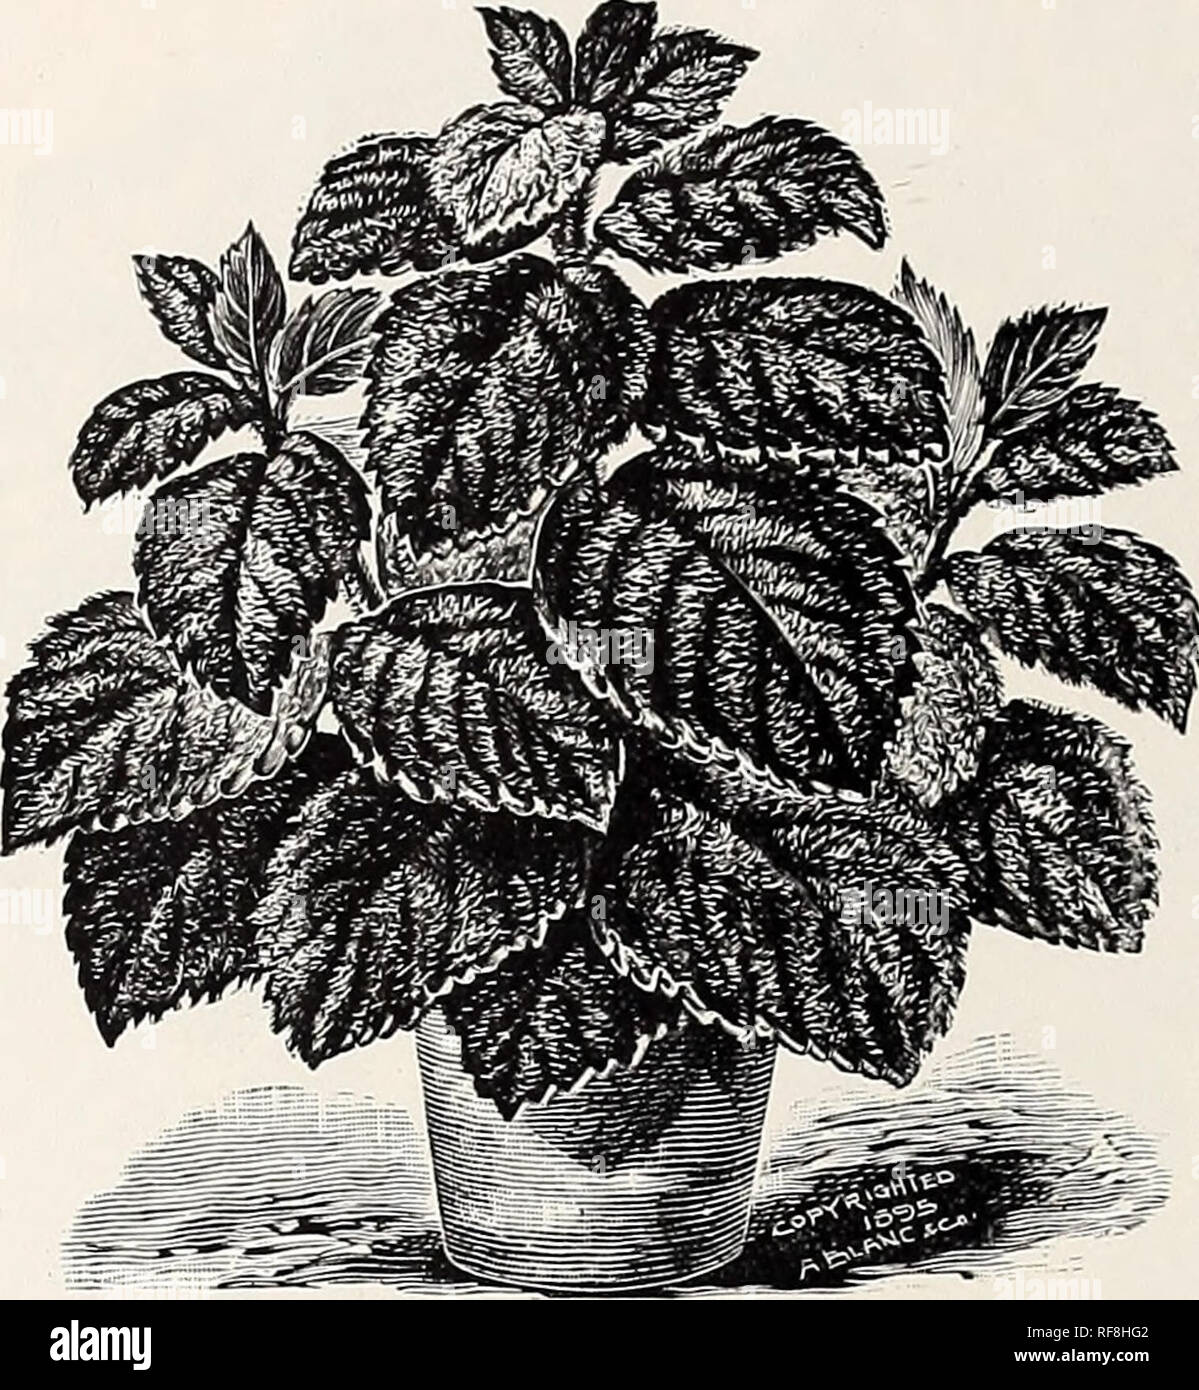 . Catalogue of novelties and specialites : plants bulbs fruits. Nursery stock, Pennsylvania, Philadelphia, Catalogs; Plants, Ornamental, Catalogs; Flowers, Catalogs; Fruit, Catalogs; Nursery stock; Plants, Ornamental; Flowers; Fruit. GYNURA AURANTIACA—THE VELVET PLANT. A Rival to the Strobilanthes—Far more beautiful in Color. As Strobilanthes proved one of the very finest bedding and ornamental plants made popidar by us—a sale of over 5,coo last season fully attesting this—so will this, a still handsomer plant, take a place, not only in every choice garden, but also among the rarest and most b Stock Photo